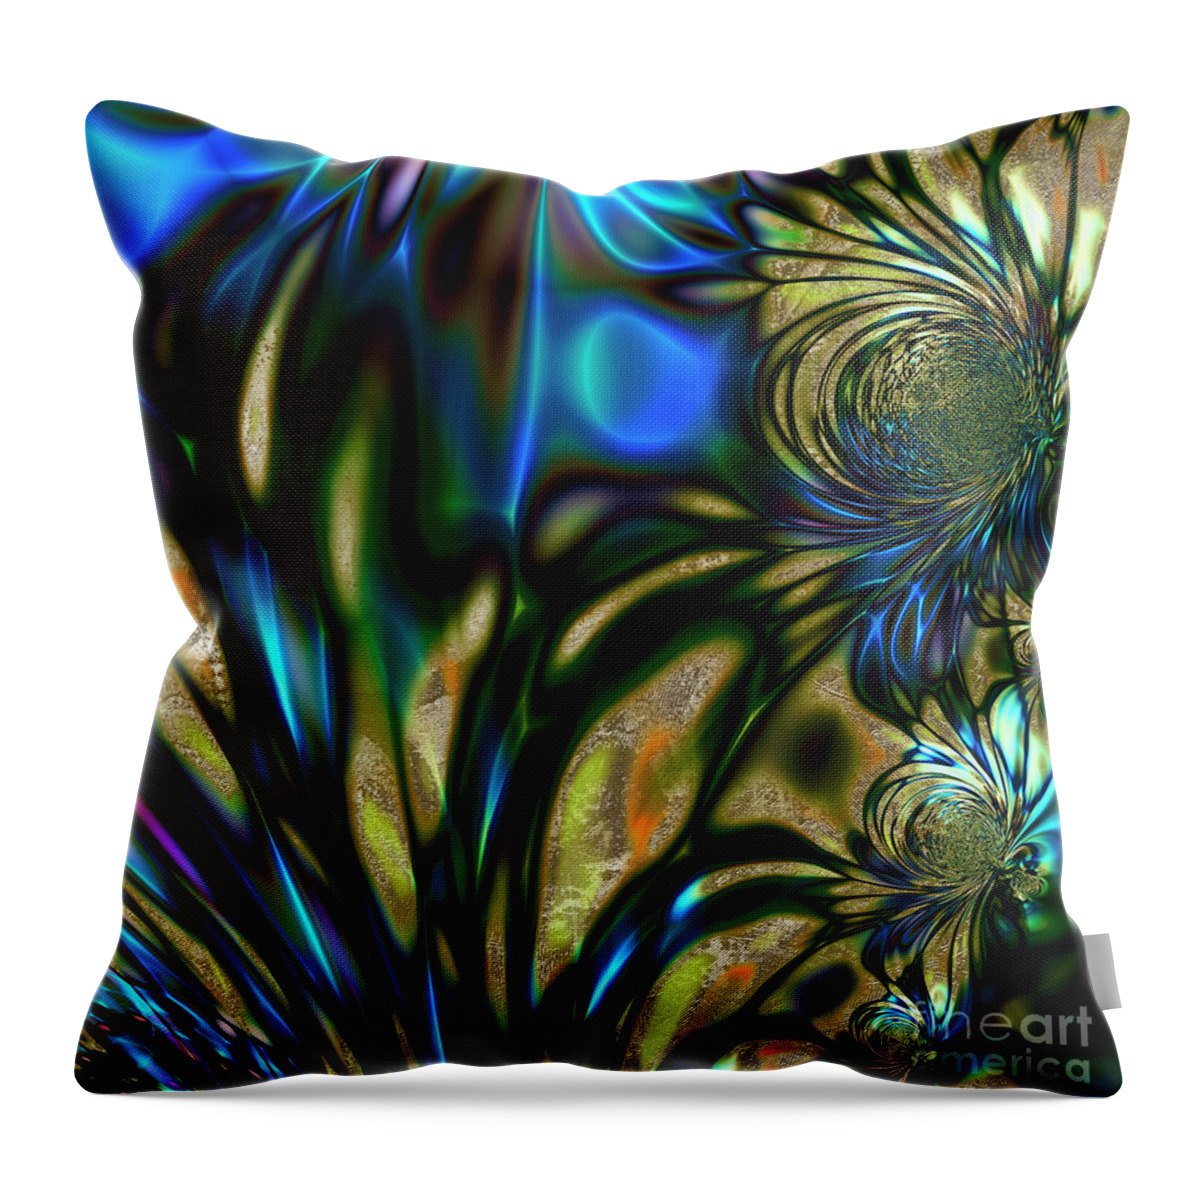 Abstract Throw Pillow featuring the painting Sun on the Corn by Mindy Sommers